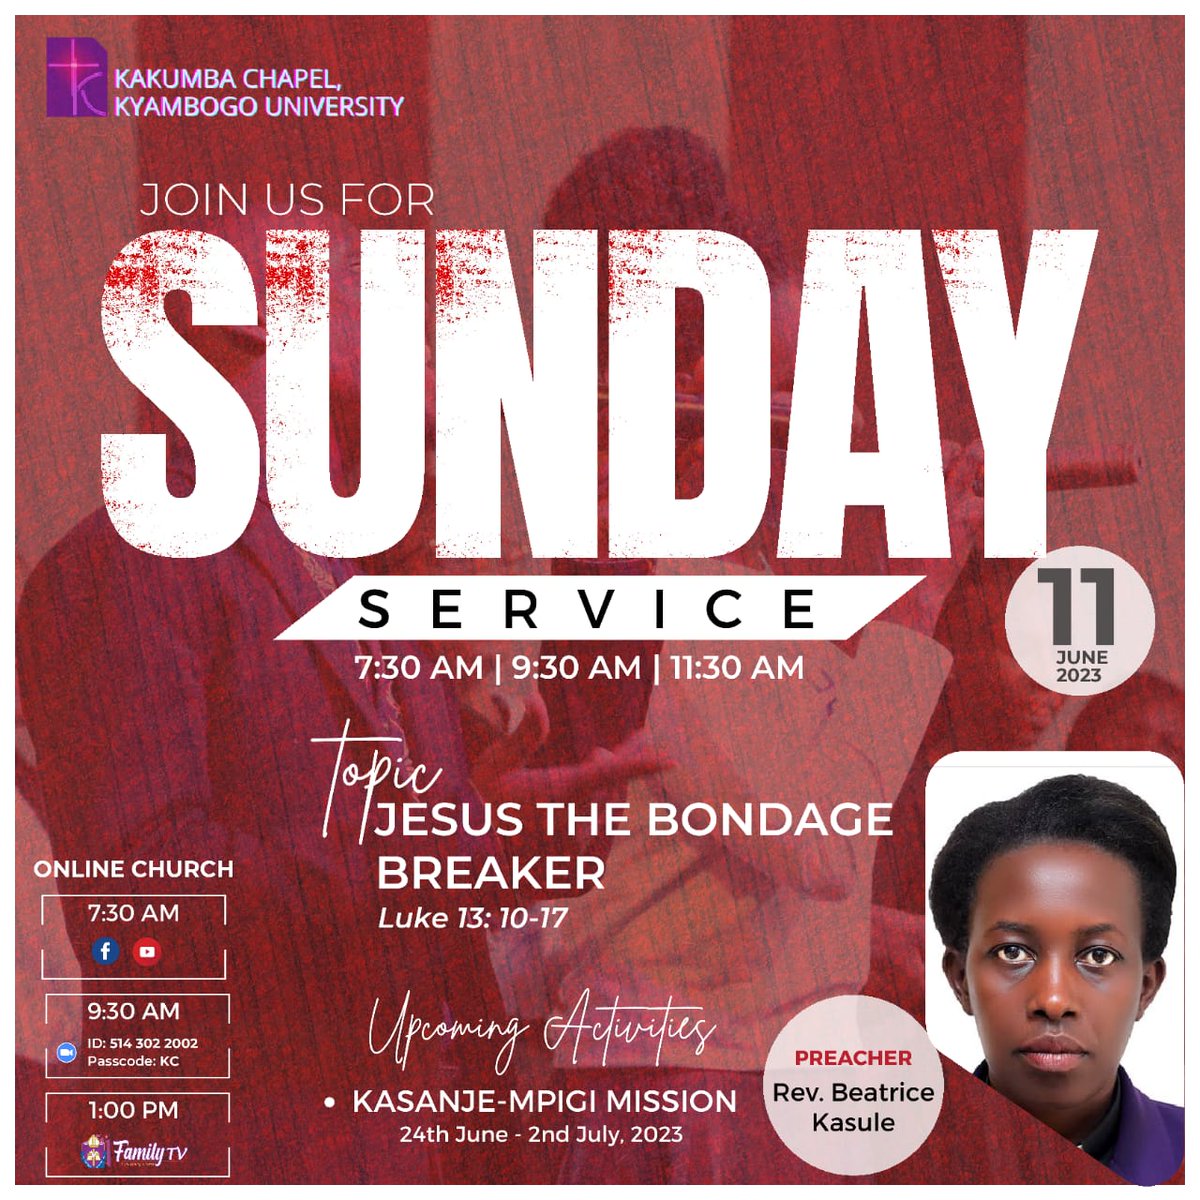 SUNDAY SERVICE @ 7:30am, 9:30 am also on zoom, 11:30am With Rev Beatrice. N. Kasule Topic: Jesus the Bondage Breaker Zoom link us02web.zoom.us/j/5143022002?p… Meeting ID: 514 302 2002 Passcode: KC.